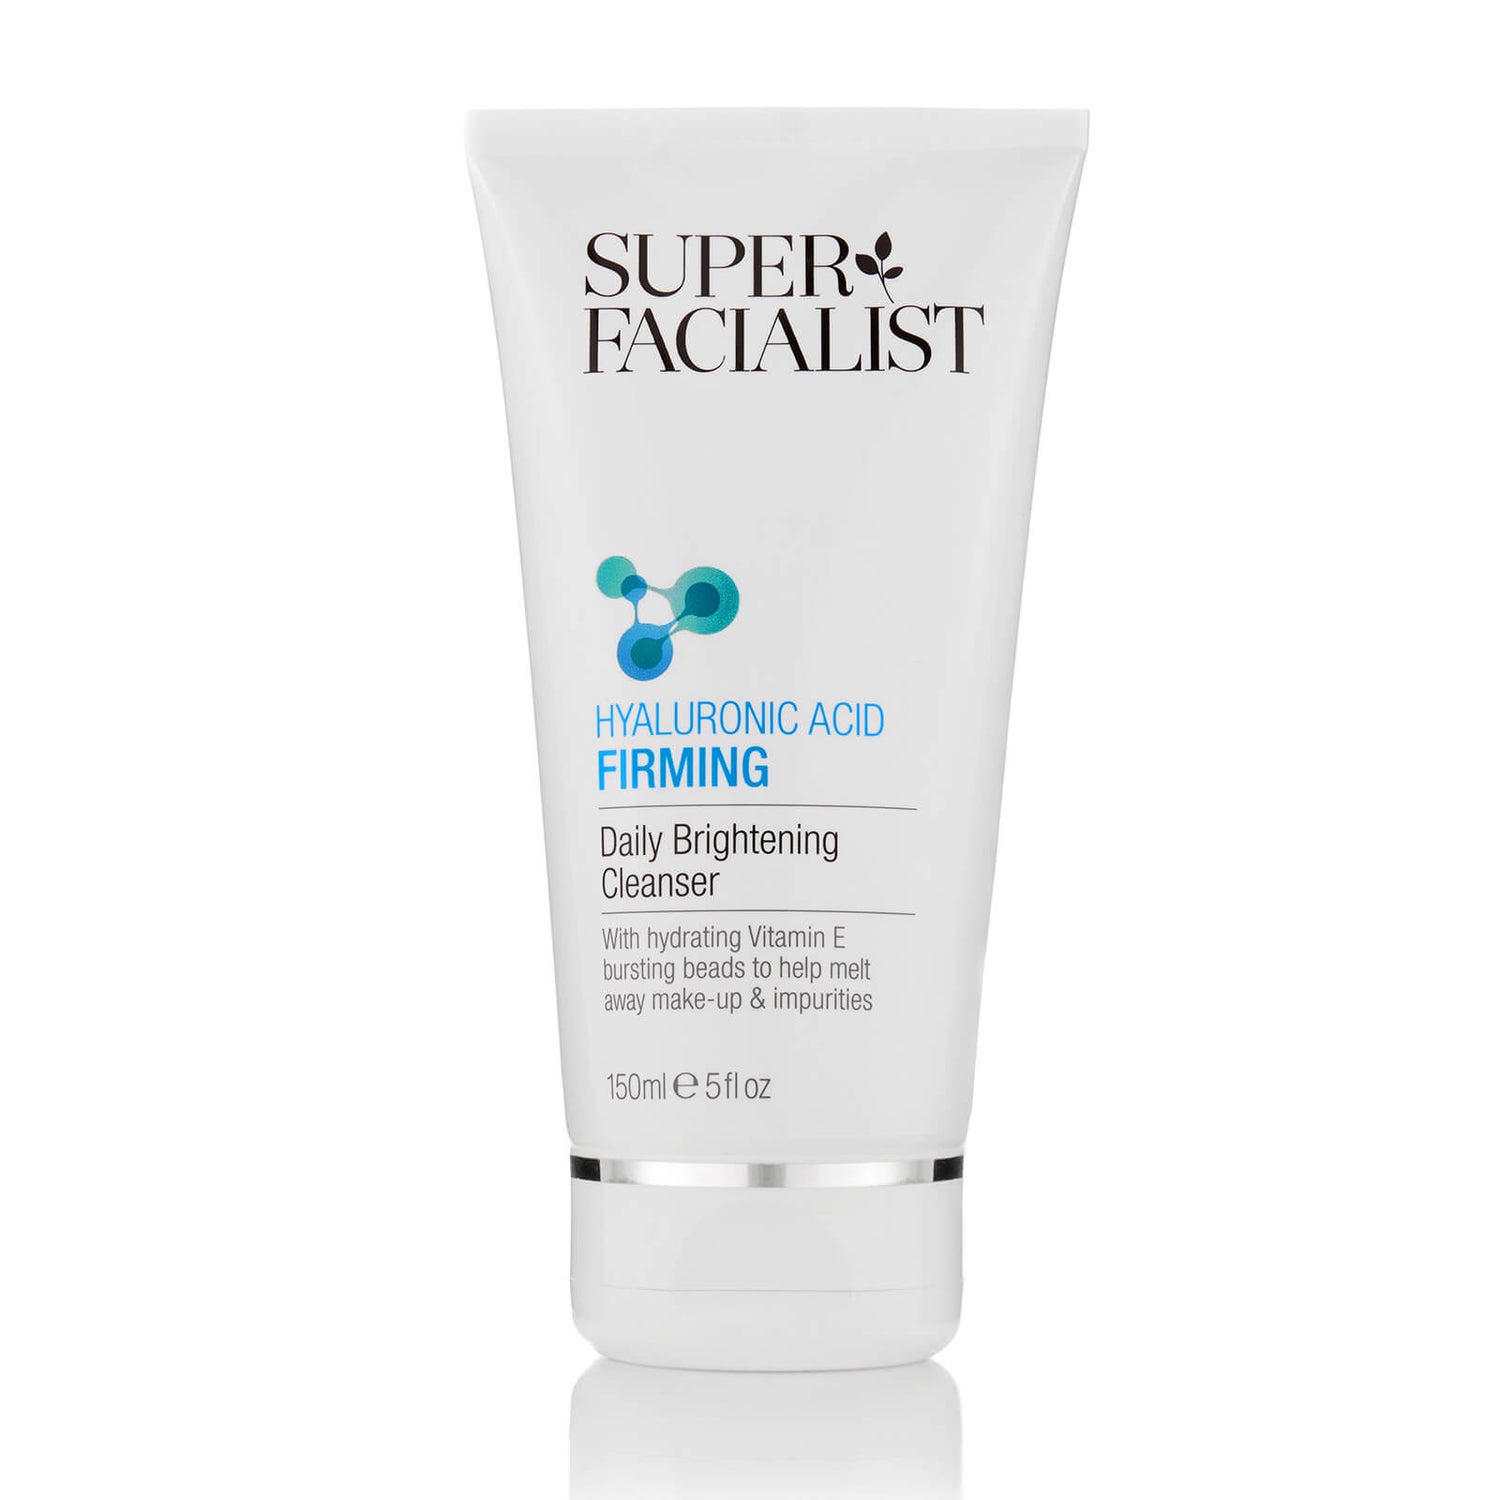 Super Facialist Hyaluronic Acid Firming Daily Brightening Cleanser - 150ml